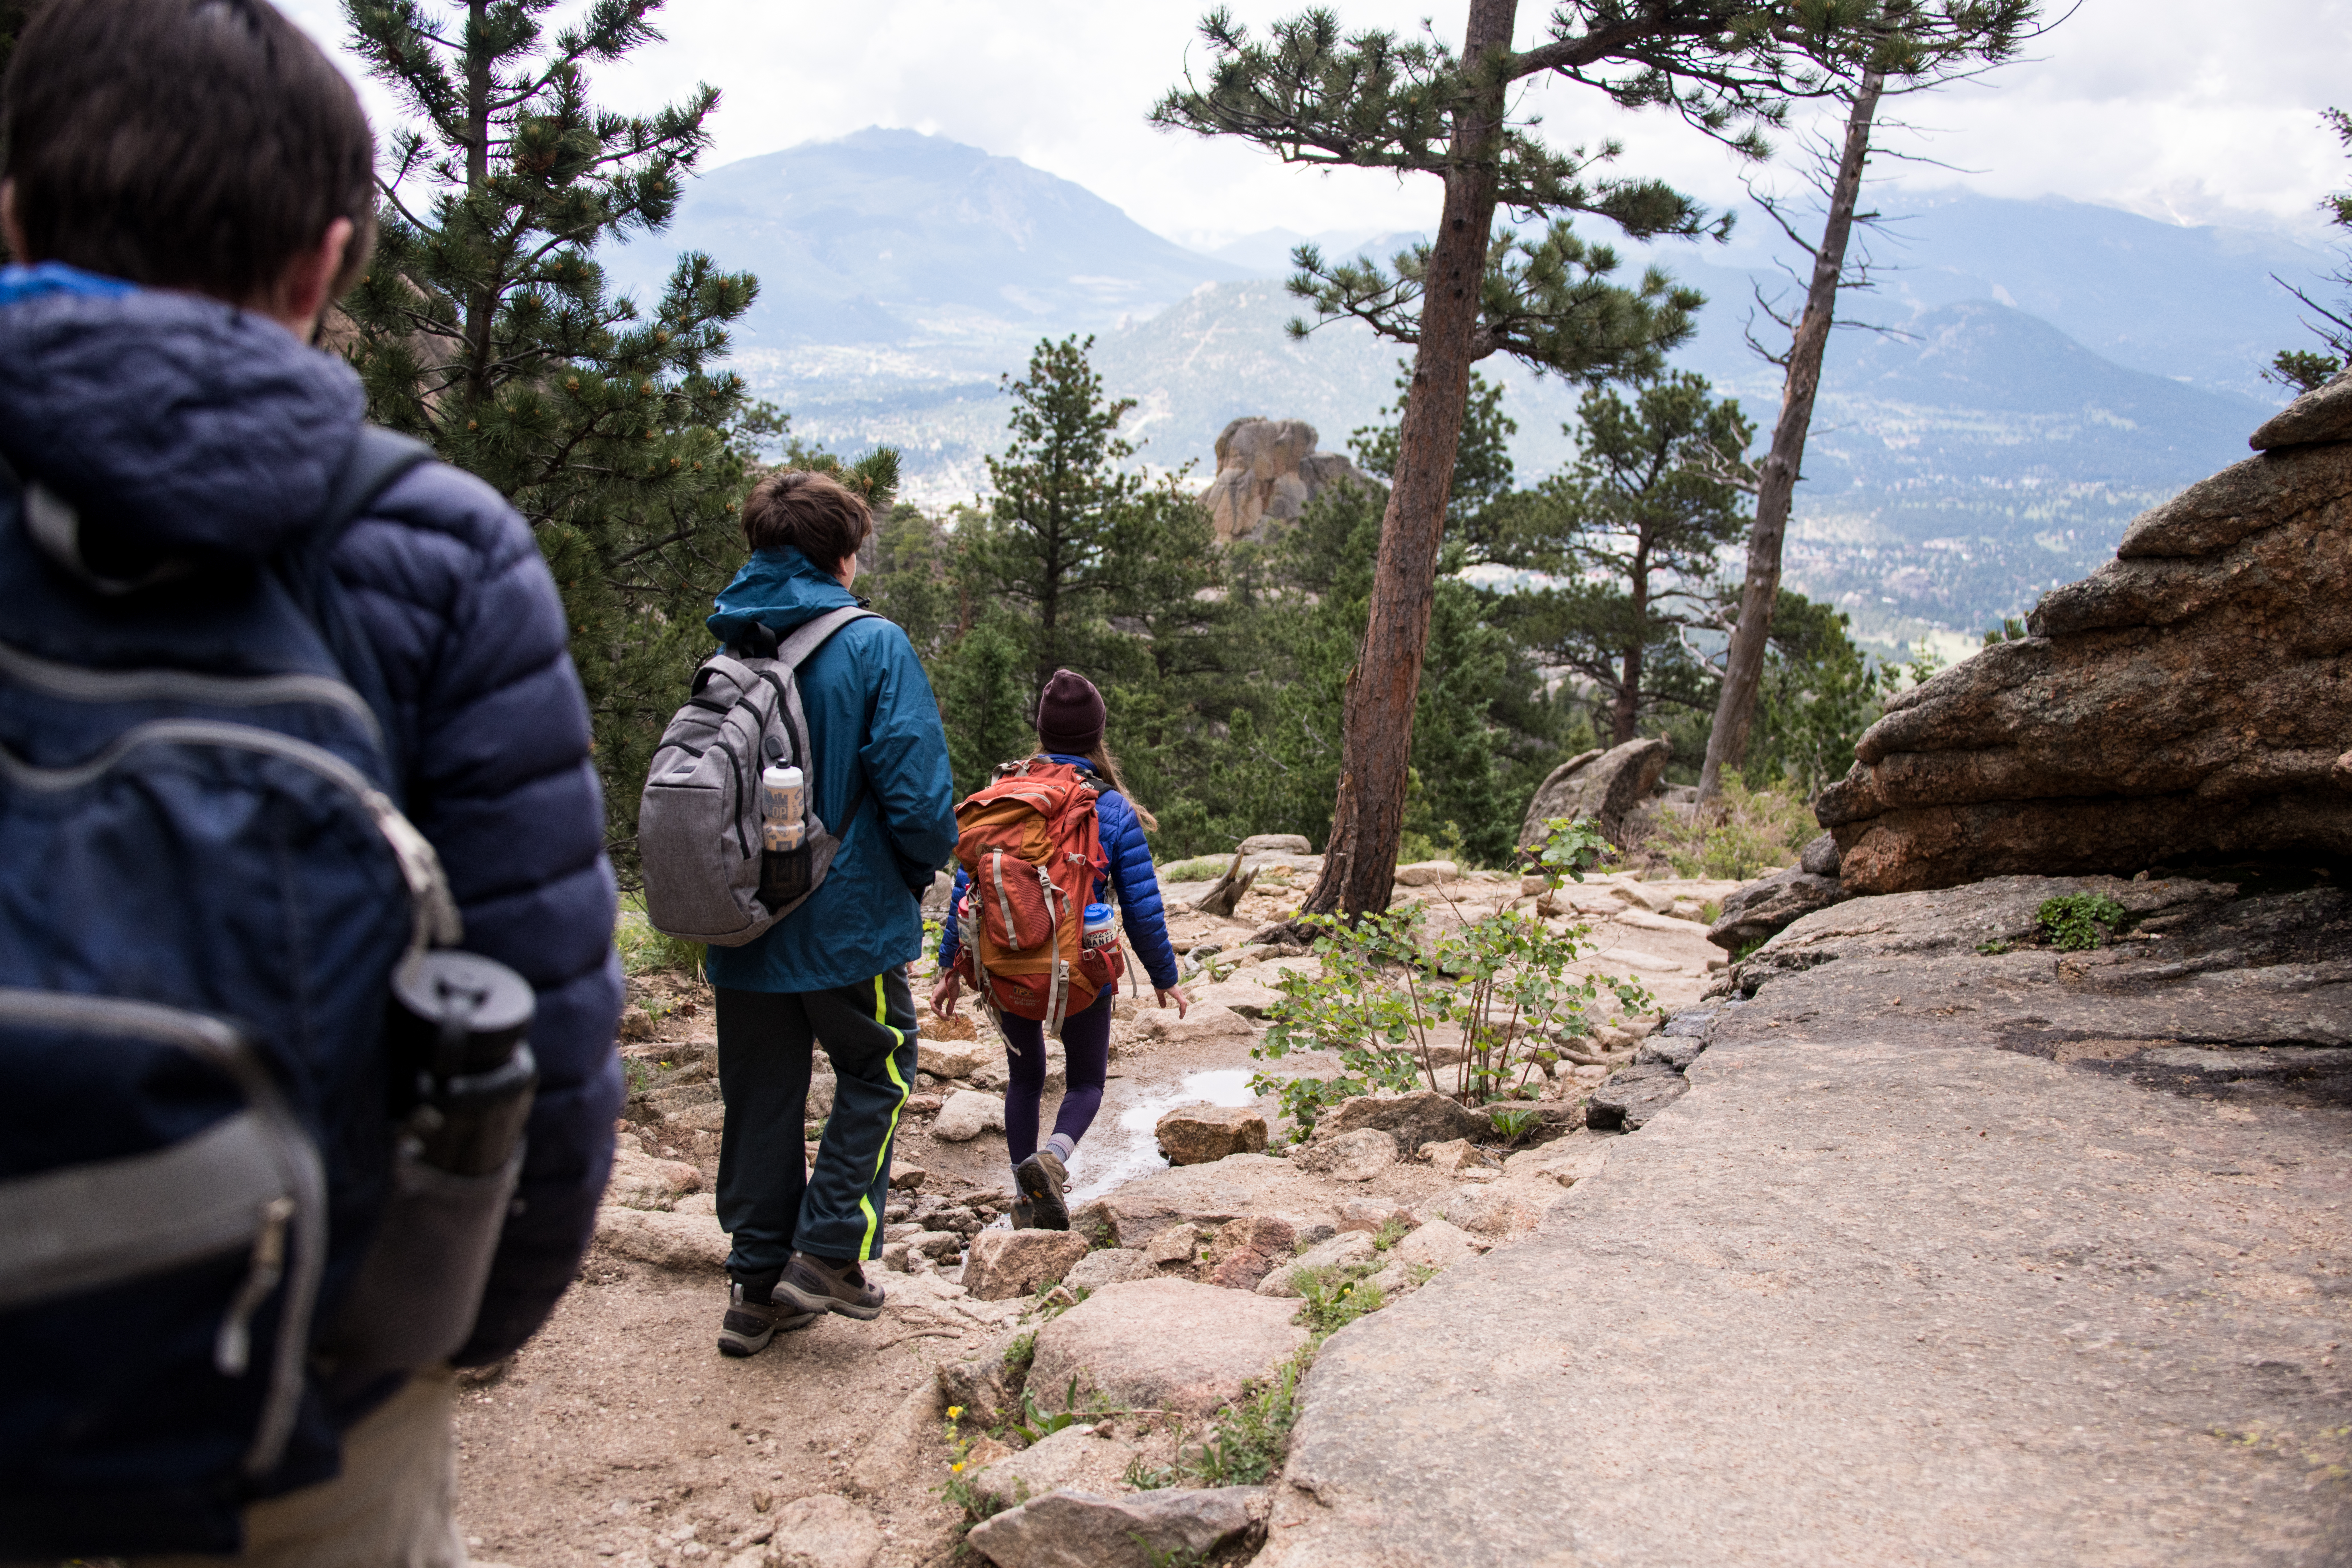 three people hiking through rocking mountain national park overlooking the town and landscape of Estes Park